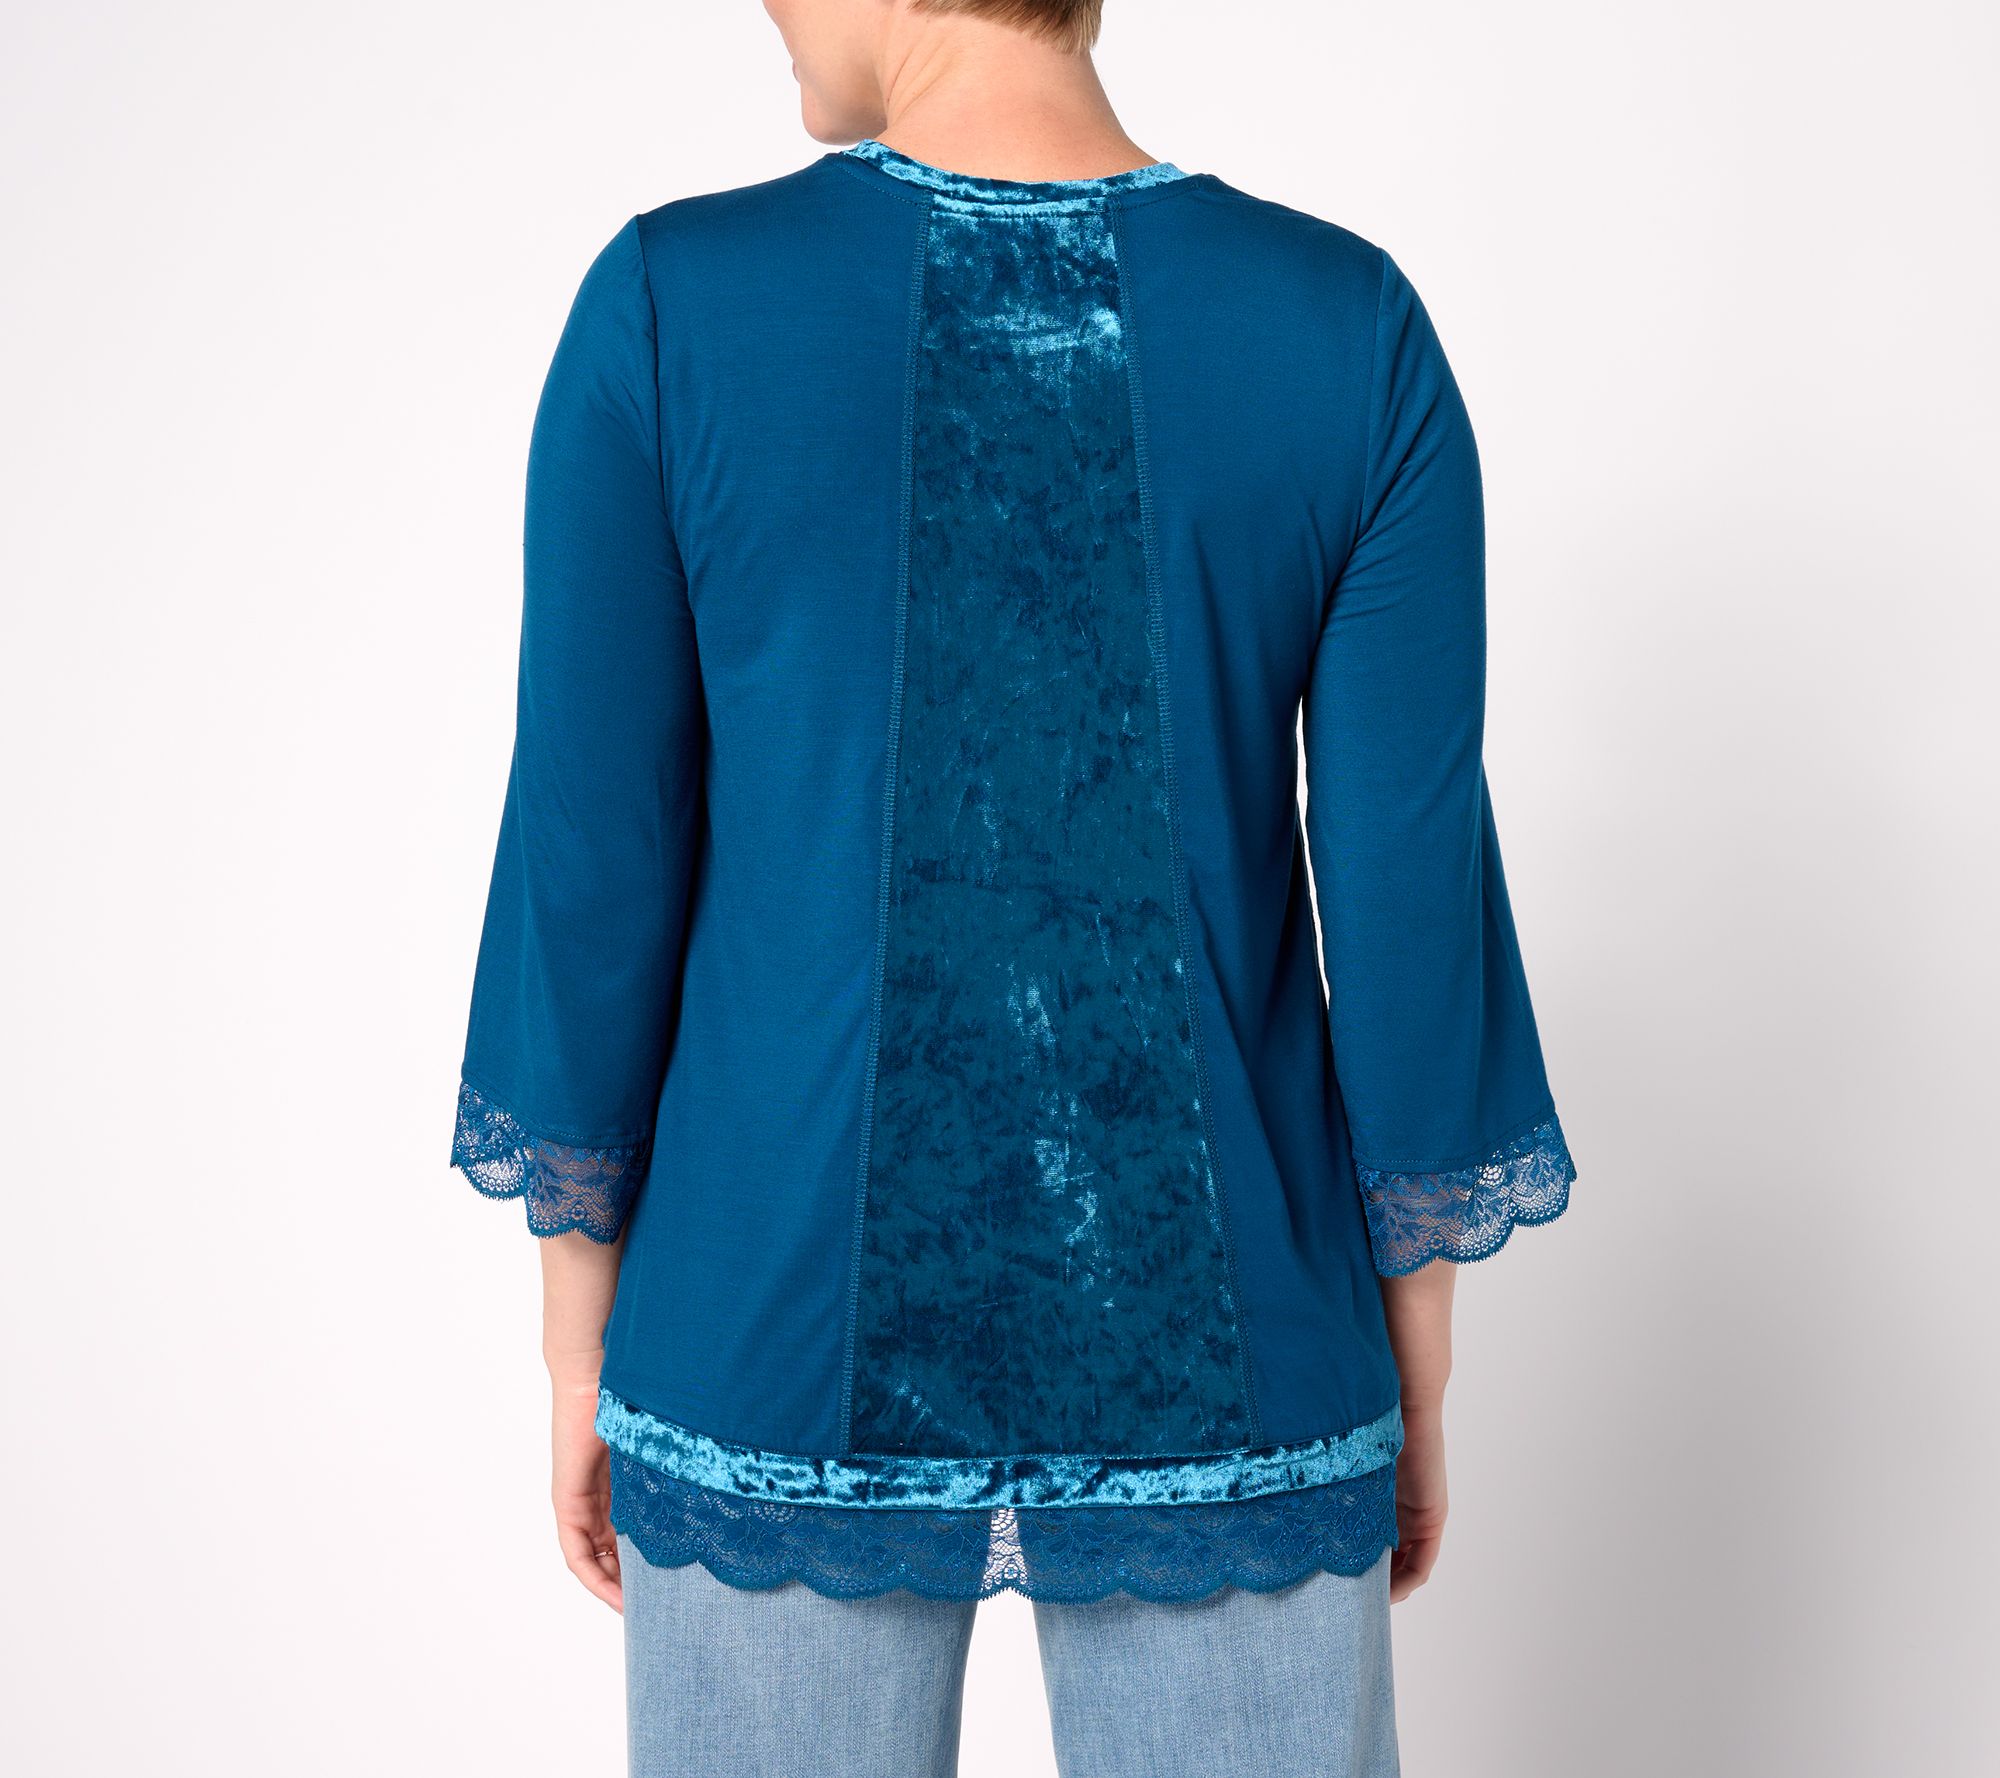 LOGO Lavish by Lori Goldstein Crushed Velvet and Lace 3/4 Sleeve Top ...